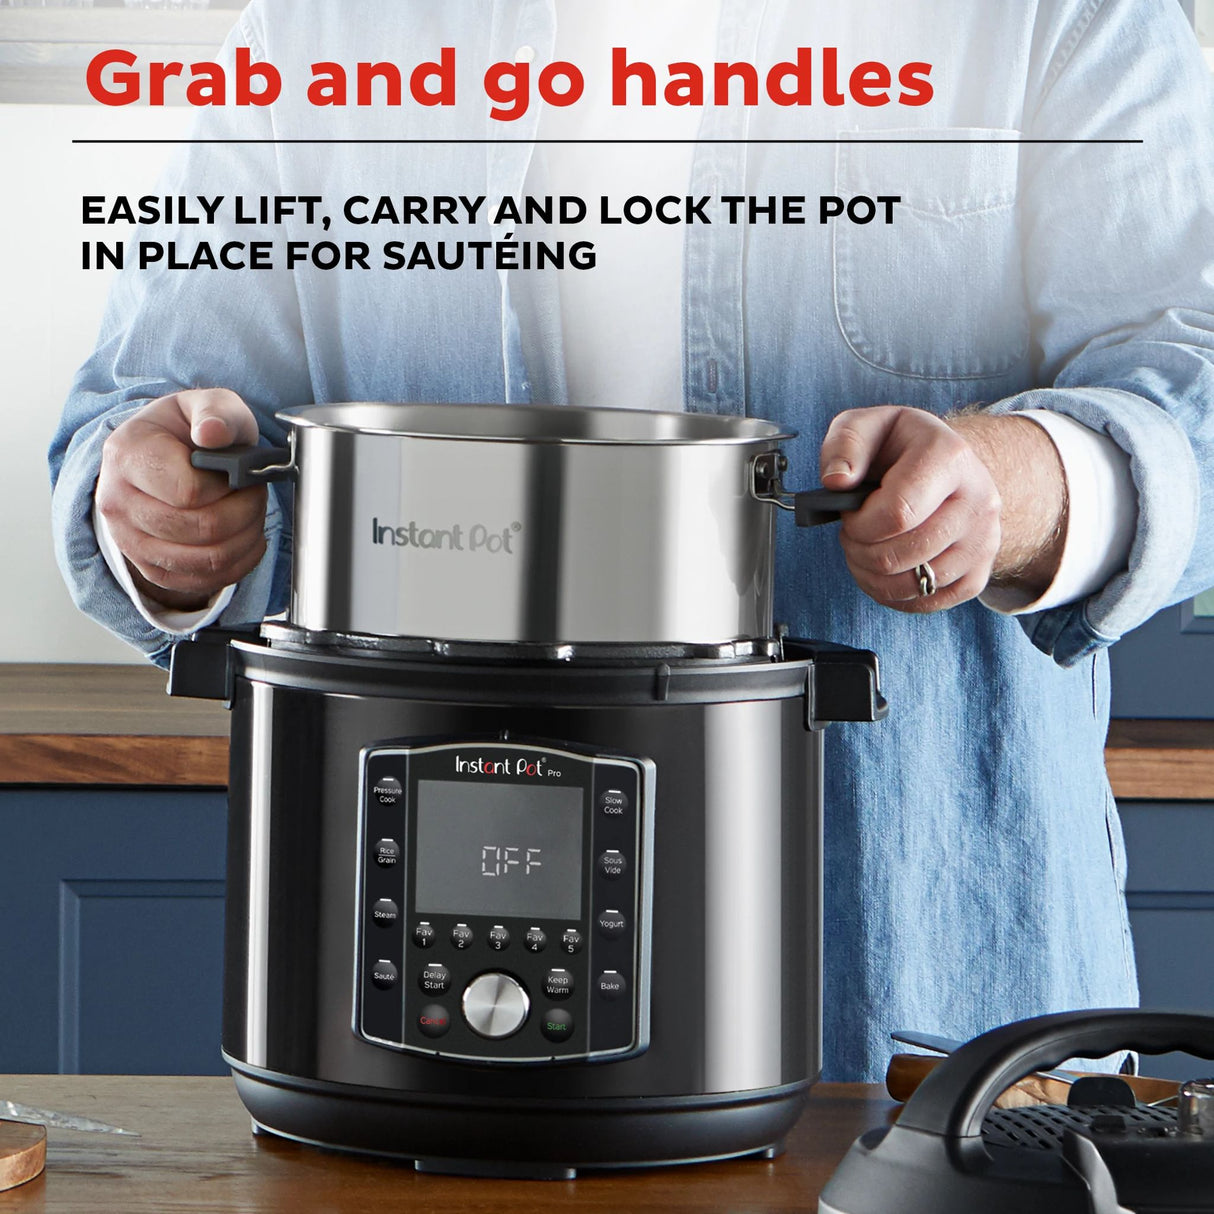  Instant Pot® Pro Multi-Use 6-qt Pressure Cooker  on counter with text Grab and go handles